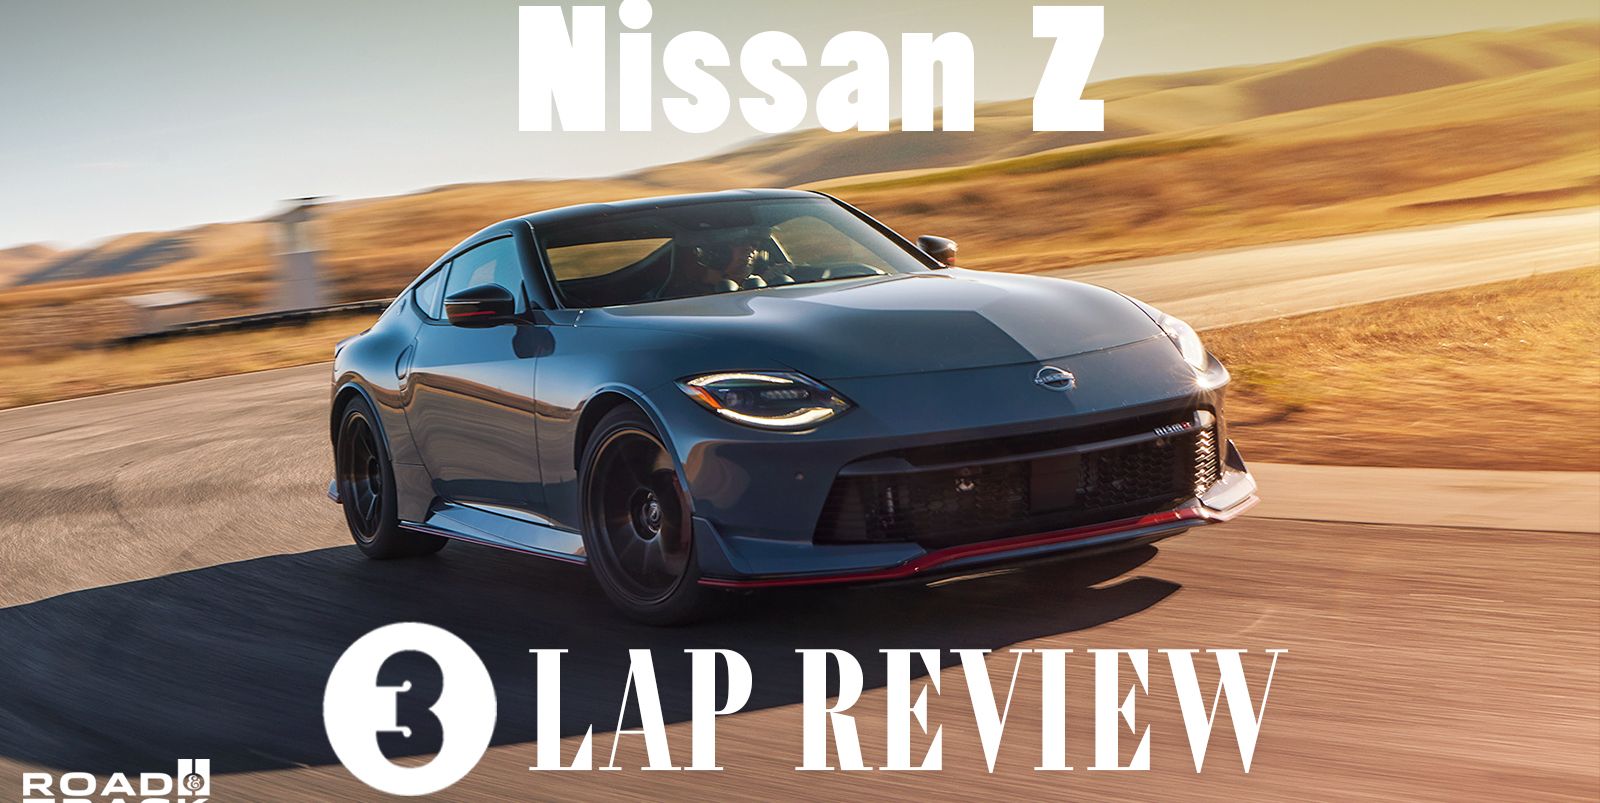 Video: The Nissan Z NISMO Doesn't Need a Manual Transmission to Be Great